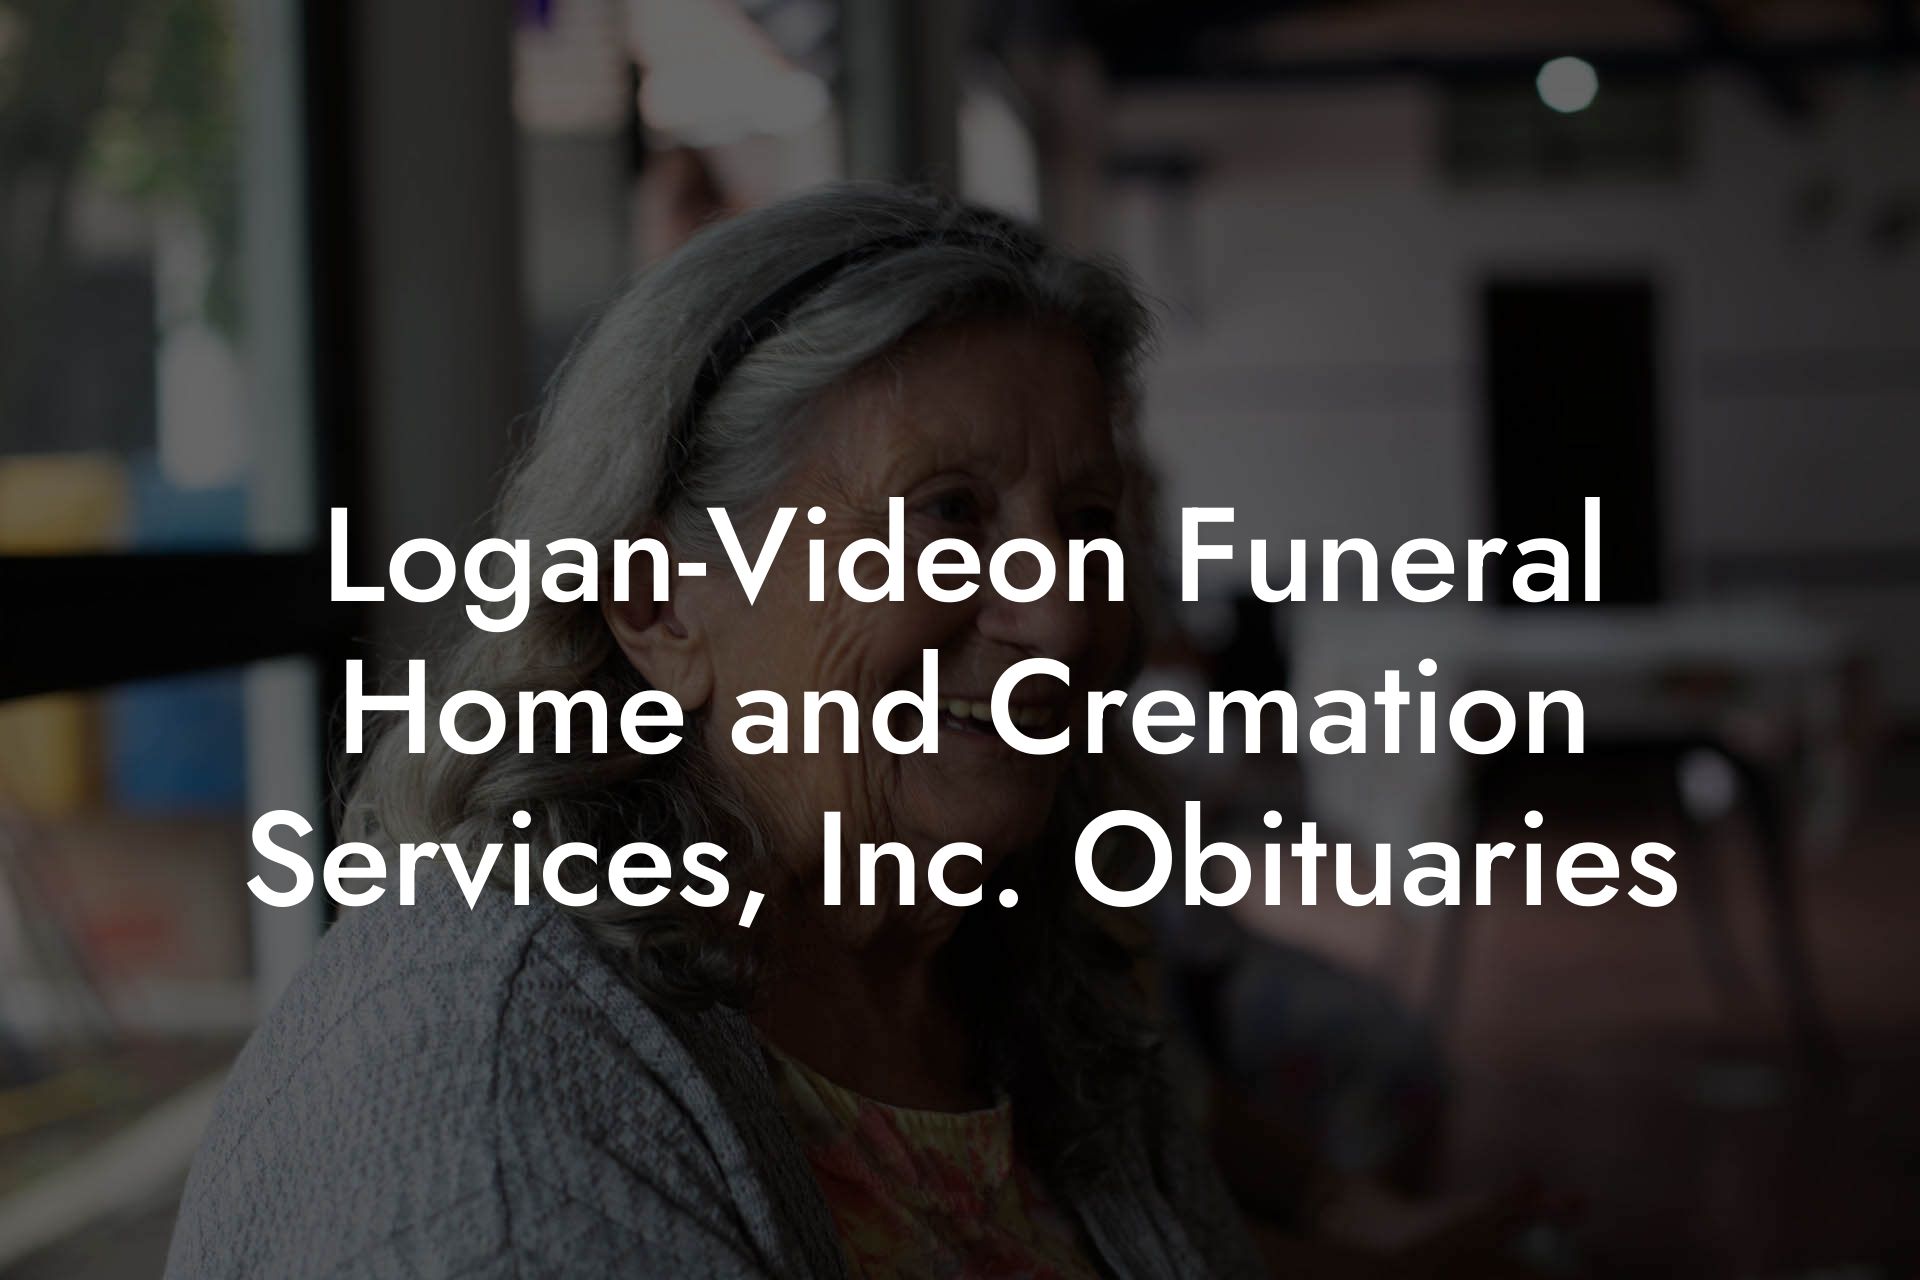 Logan-Videon Funeral Home and Cremation Services, Inc. Obituaries